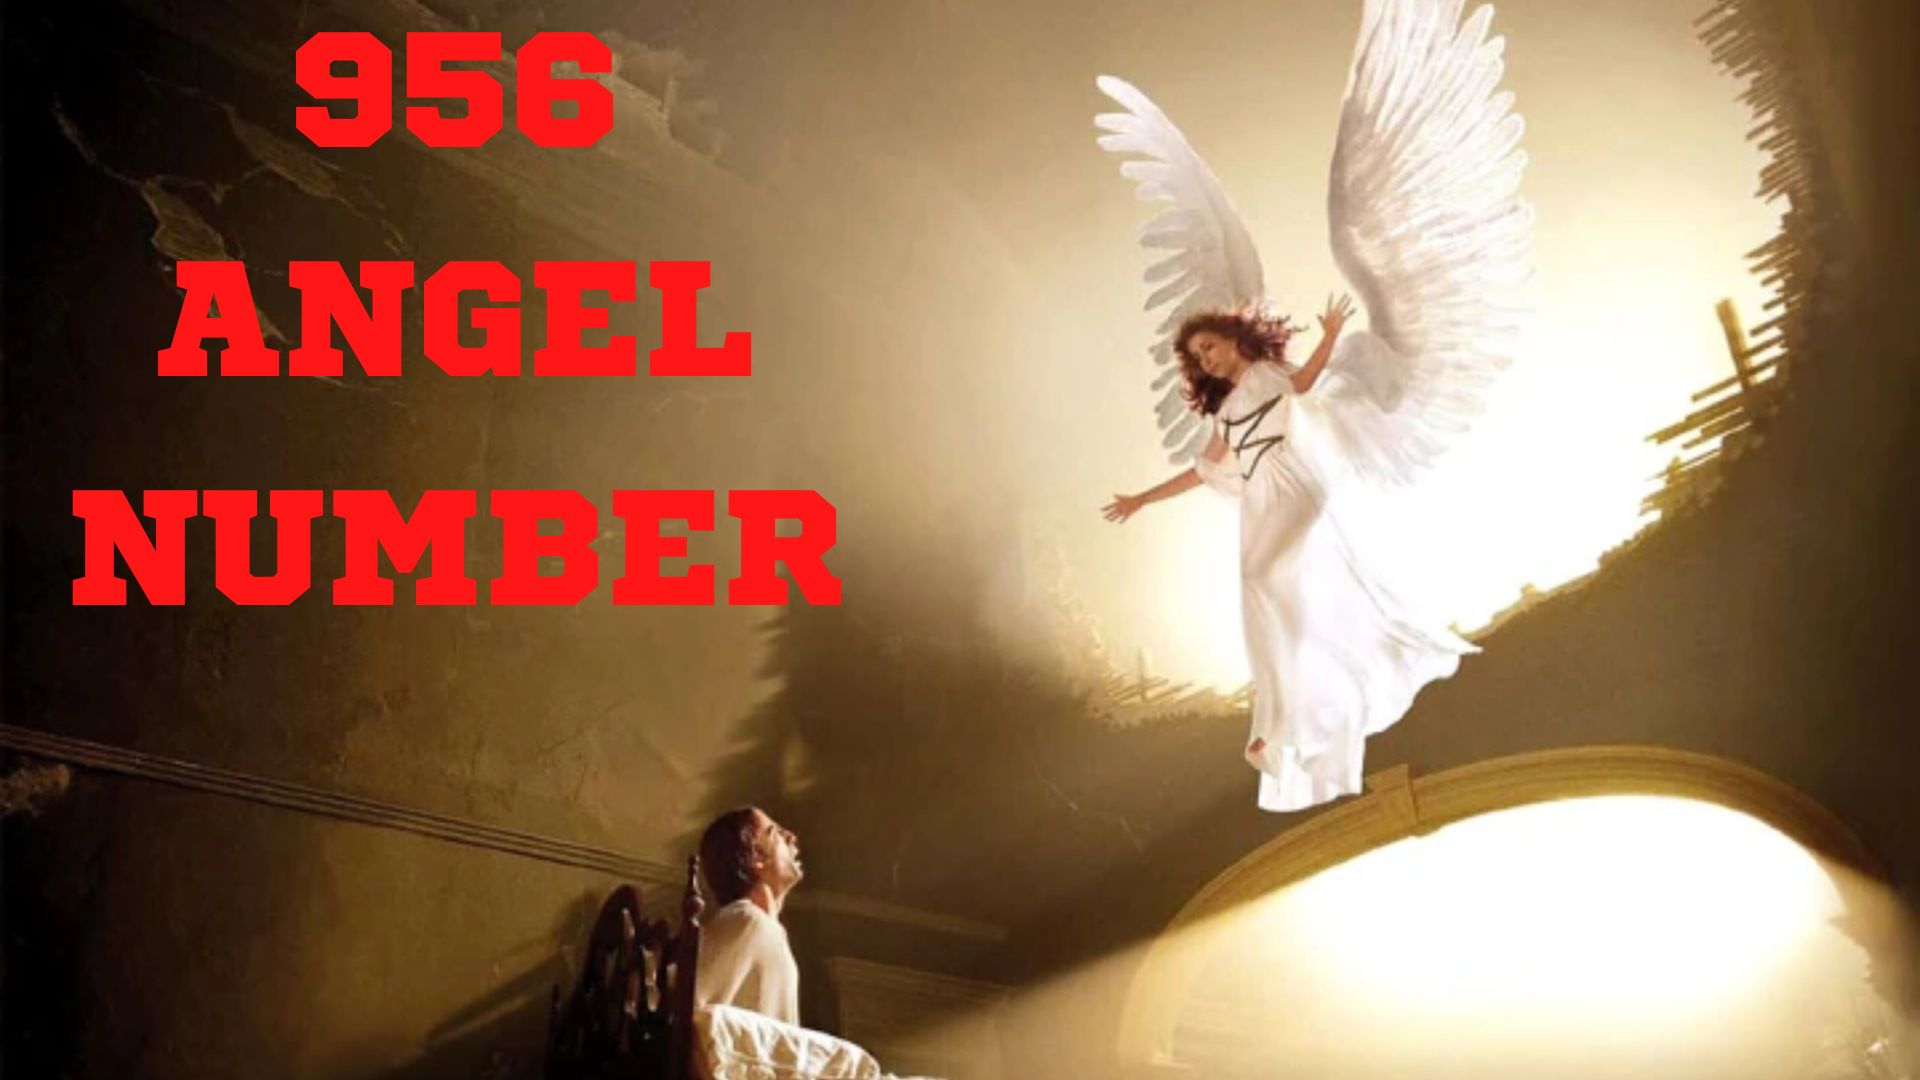 956 Angel Number - A Message Of Maturity & Wisdom